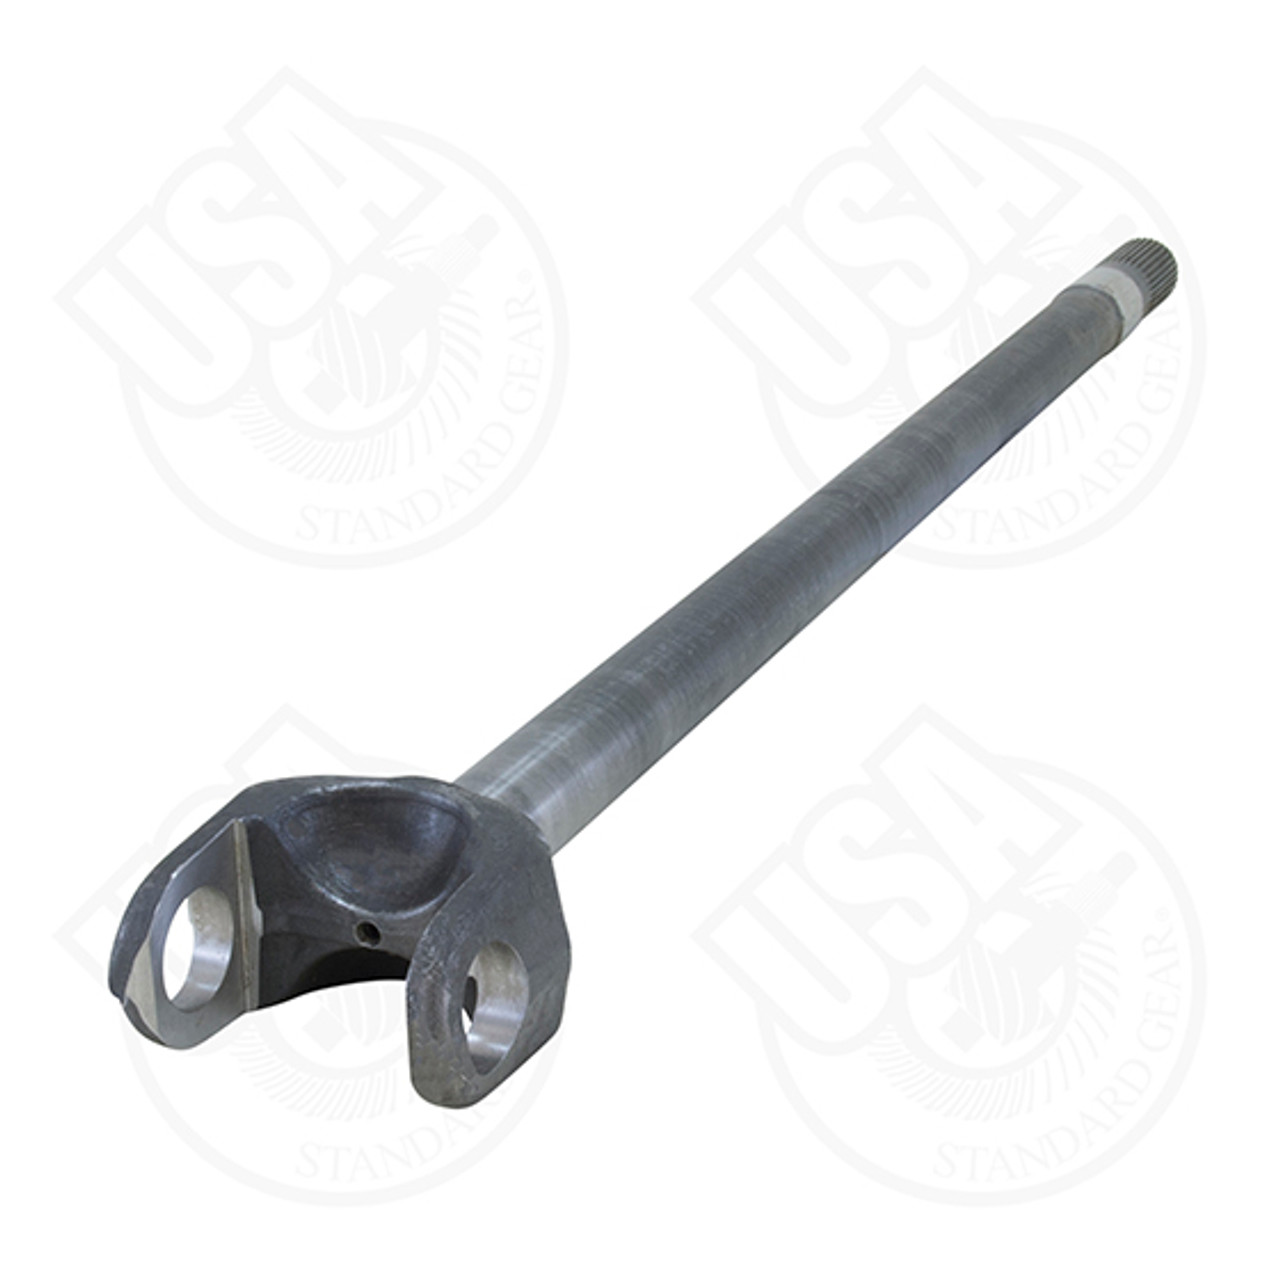 4340 Chrome-Moly replacement  inner axle for '85-'88 Ford Dana 60